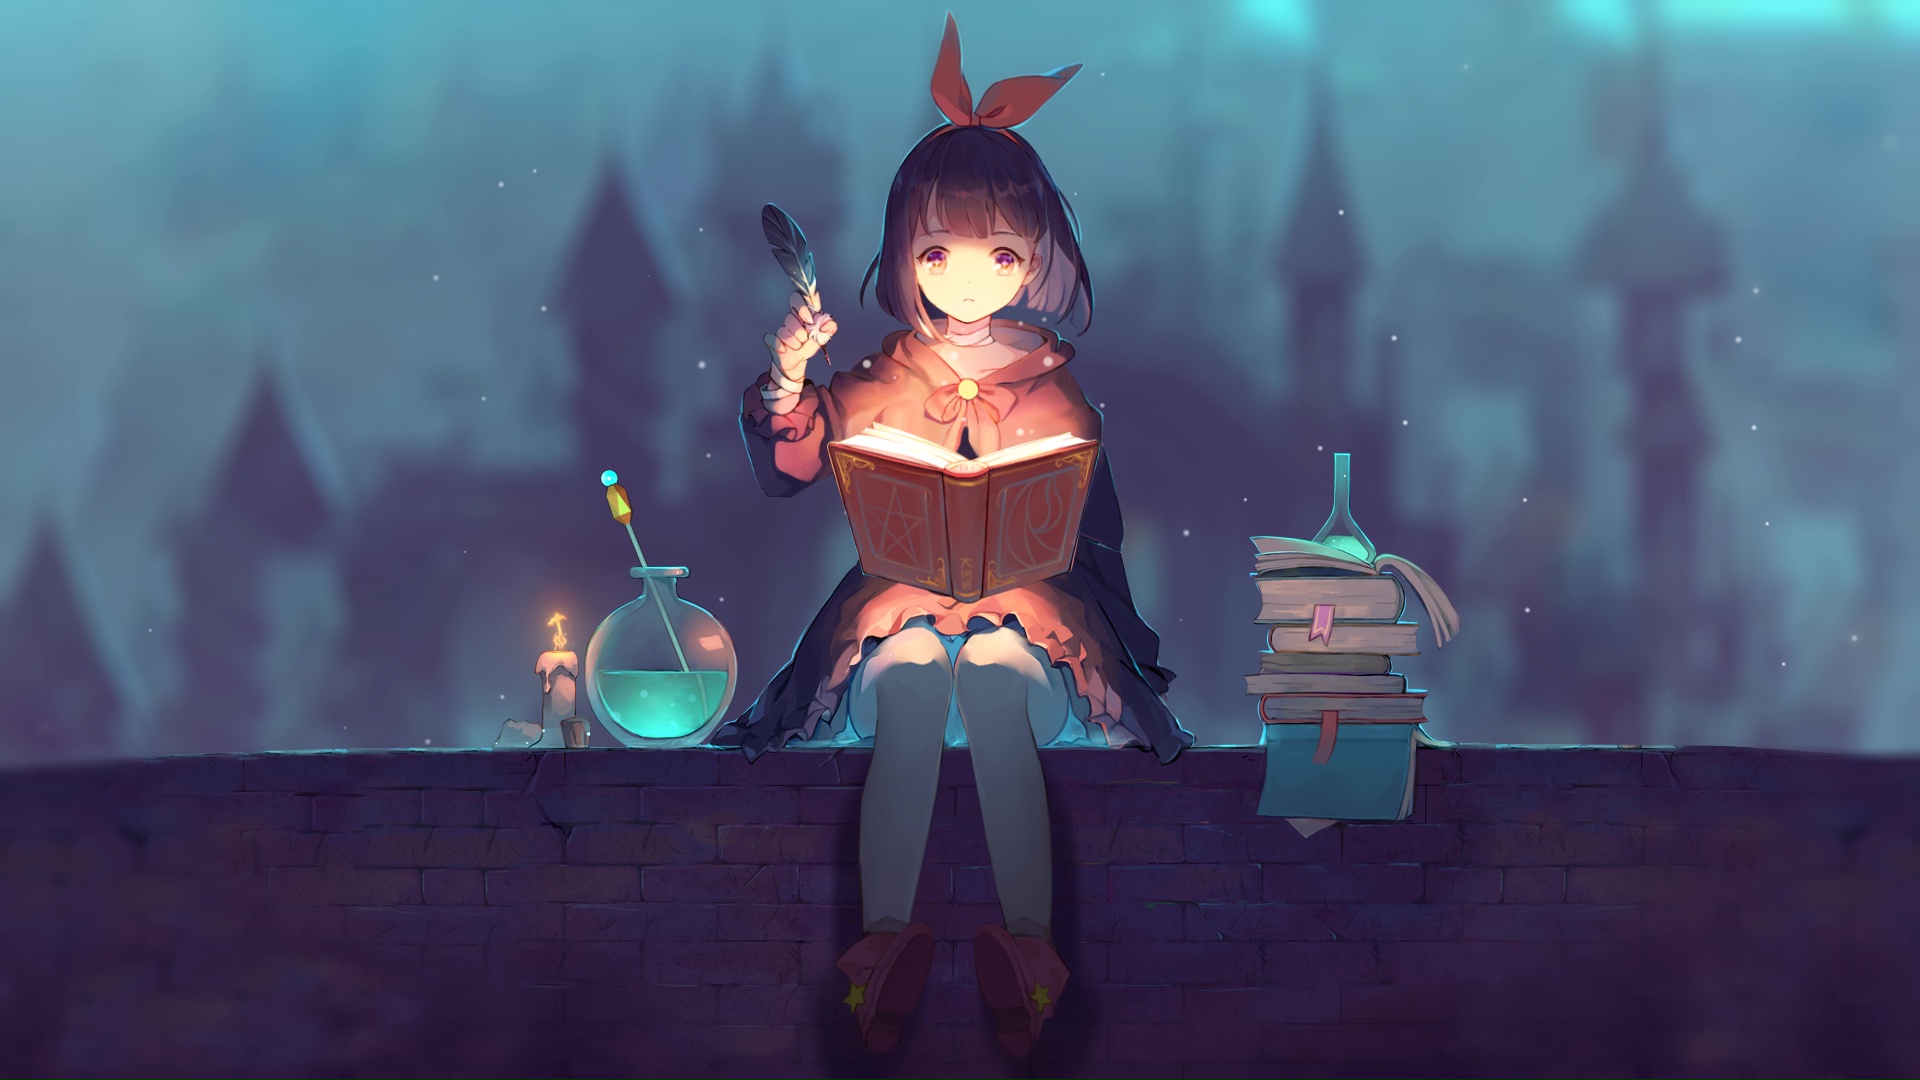 Live Wallpaper: angel, book, anime girls, anime, magic, mercy, arts, room,  witch | 1920x1080 - Rare Gallery HD Live Wallpapers